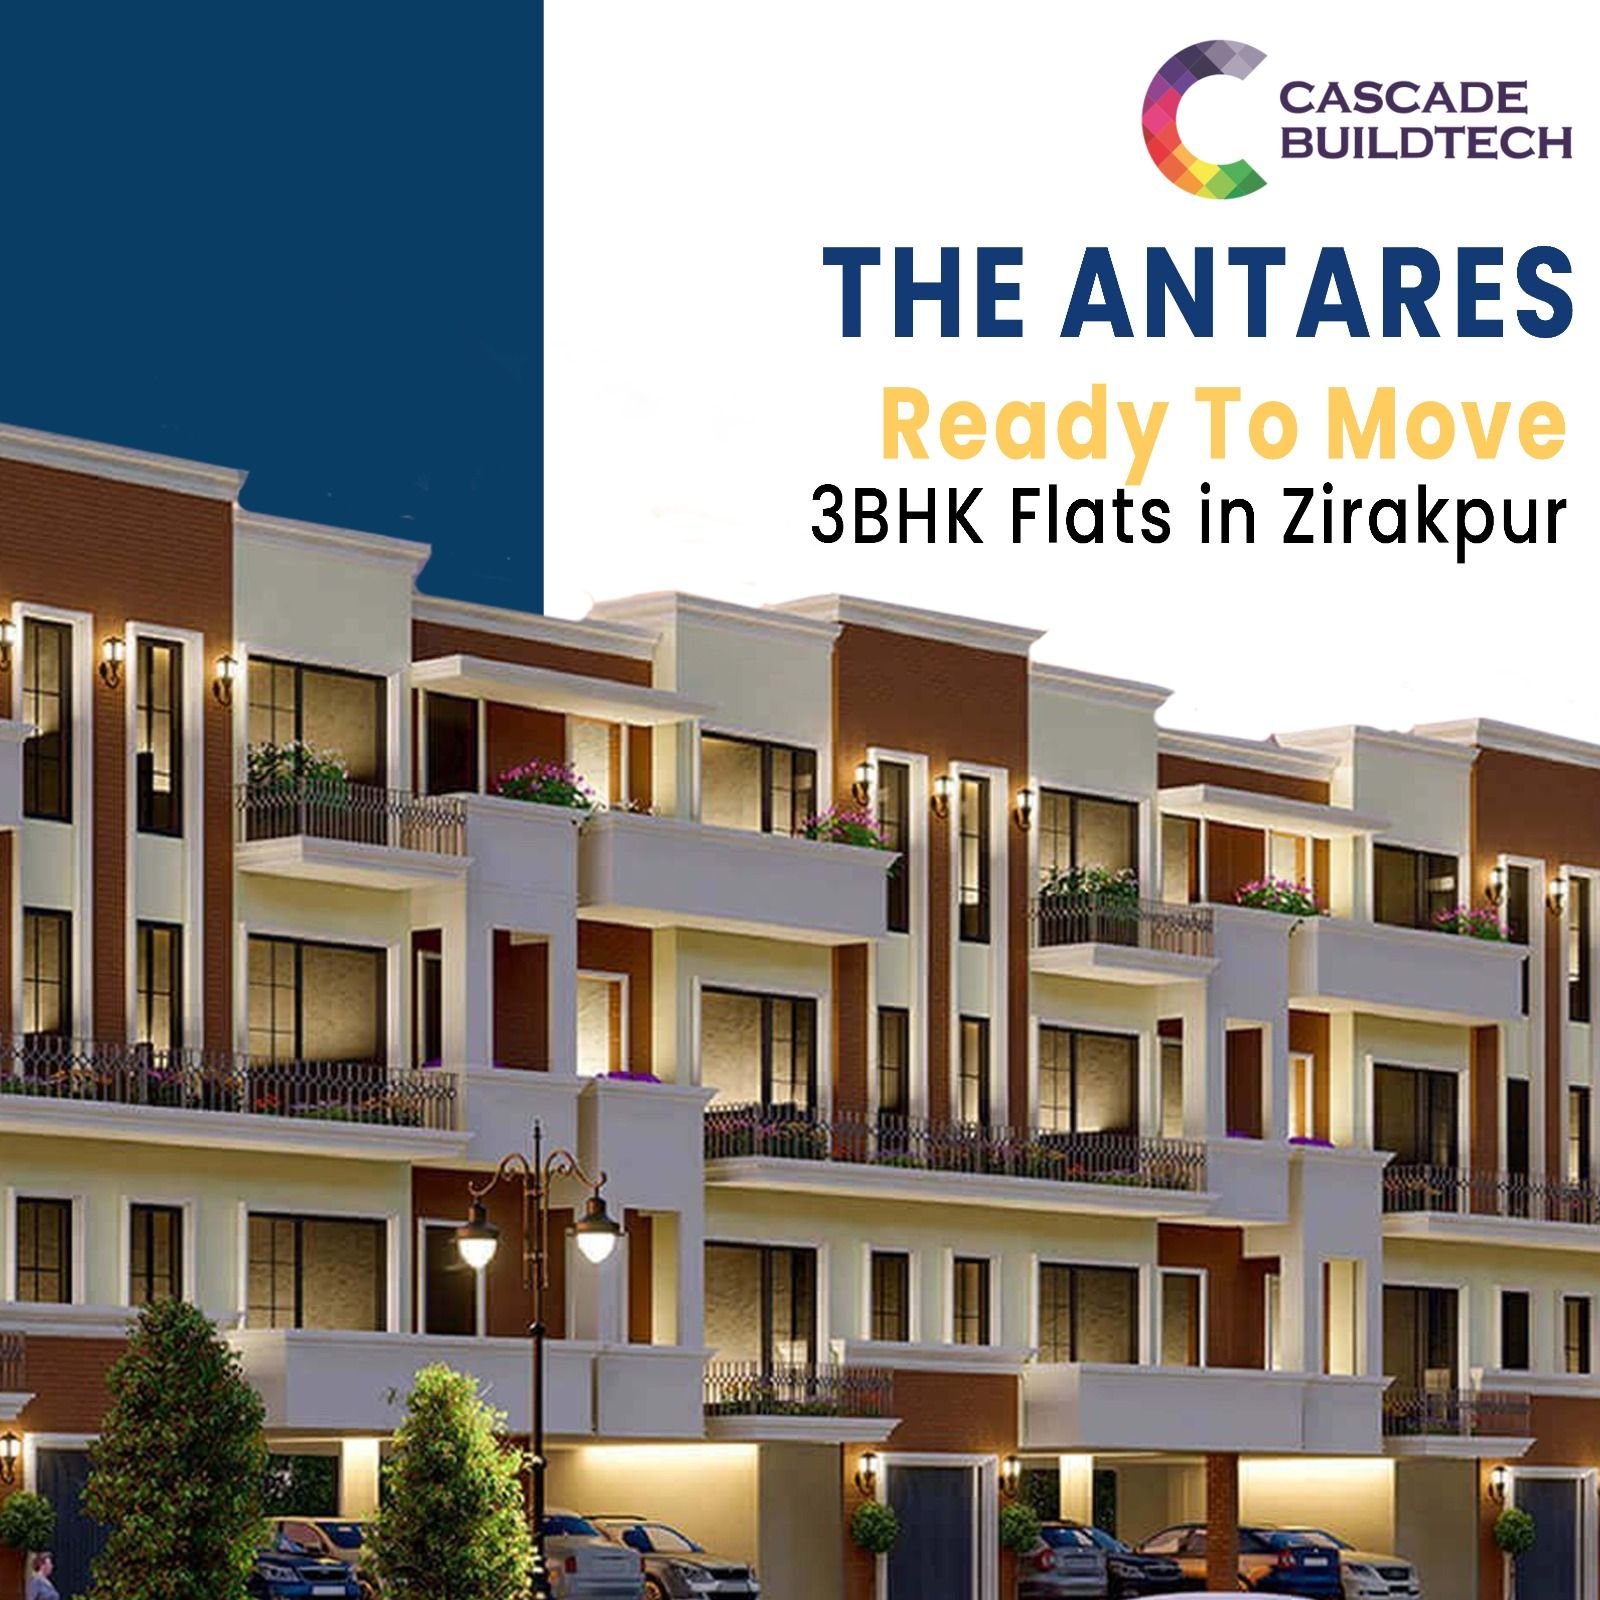 The Antares Ready To Move 3BHK Flats Zirakpur